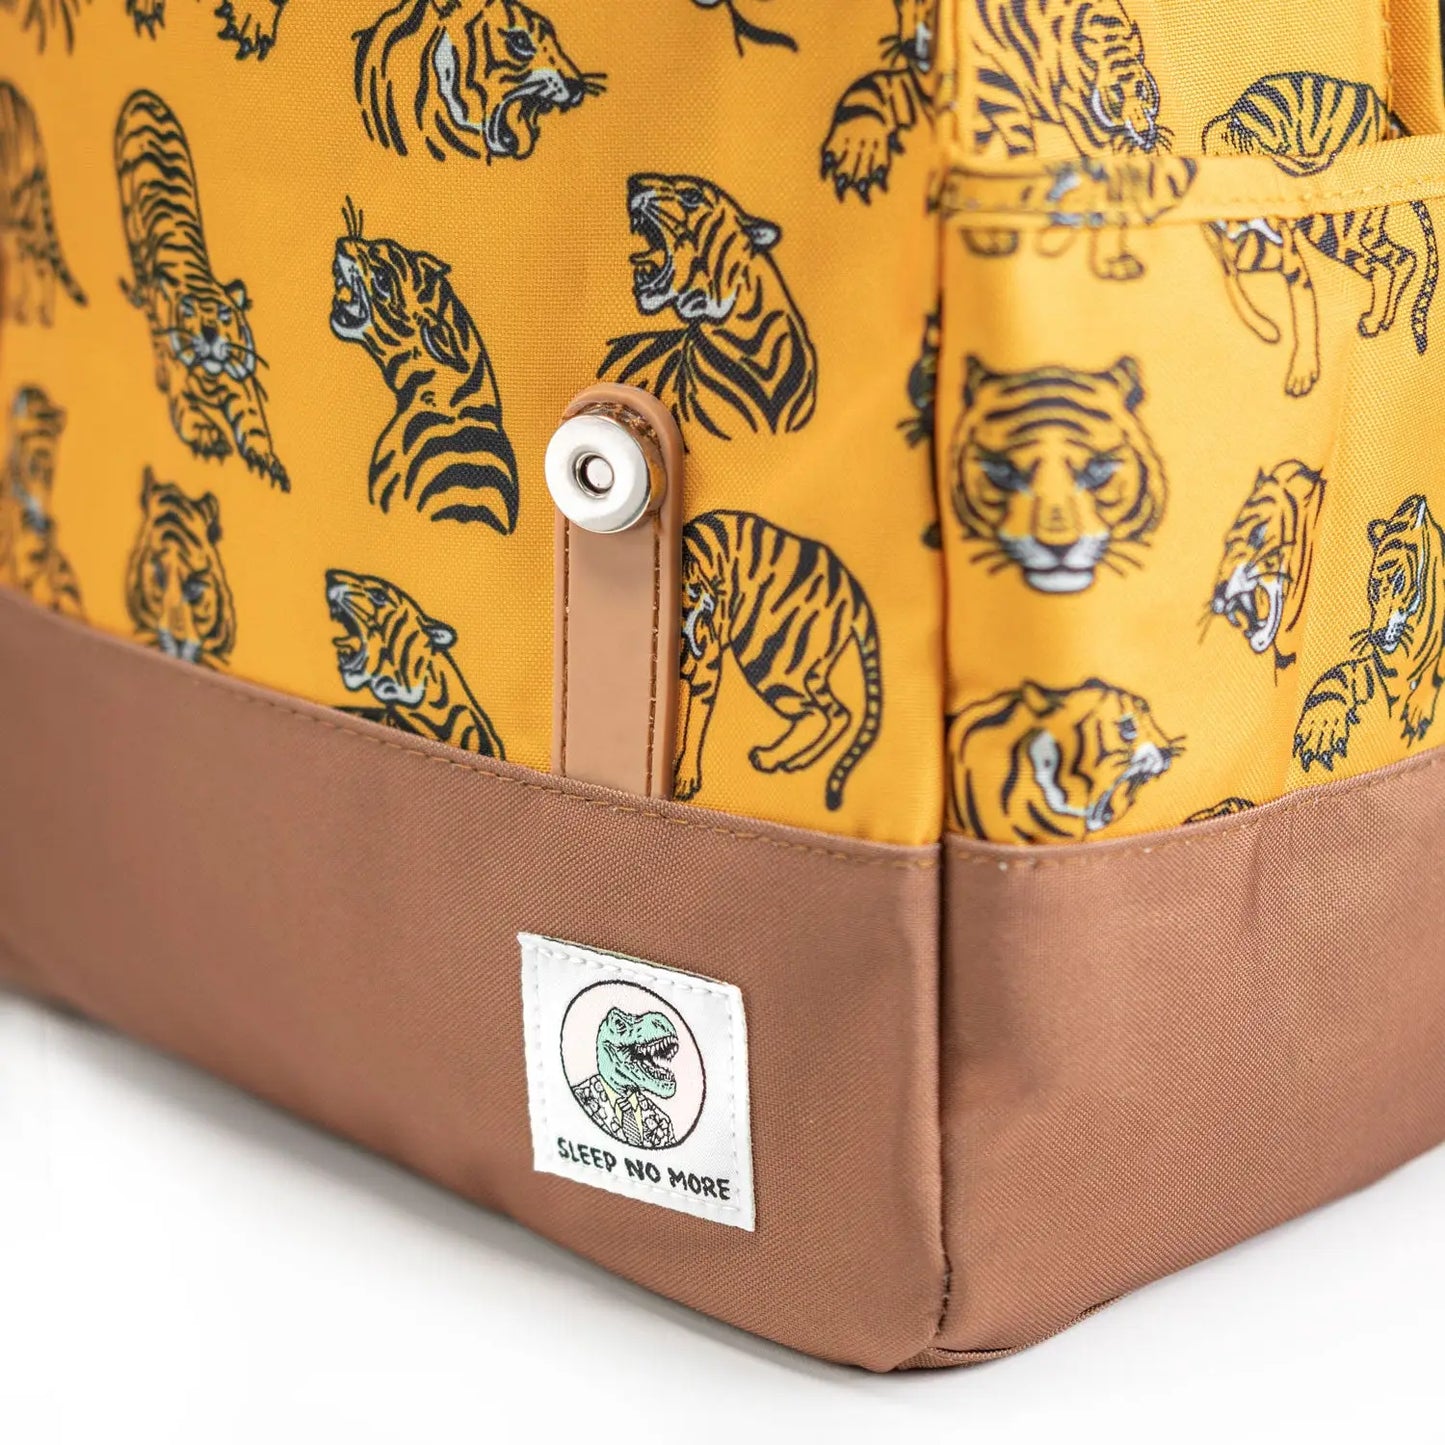 QUALITY TIGER BACKPACK (FULL SIZE)